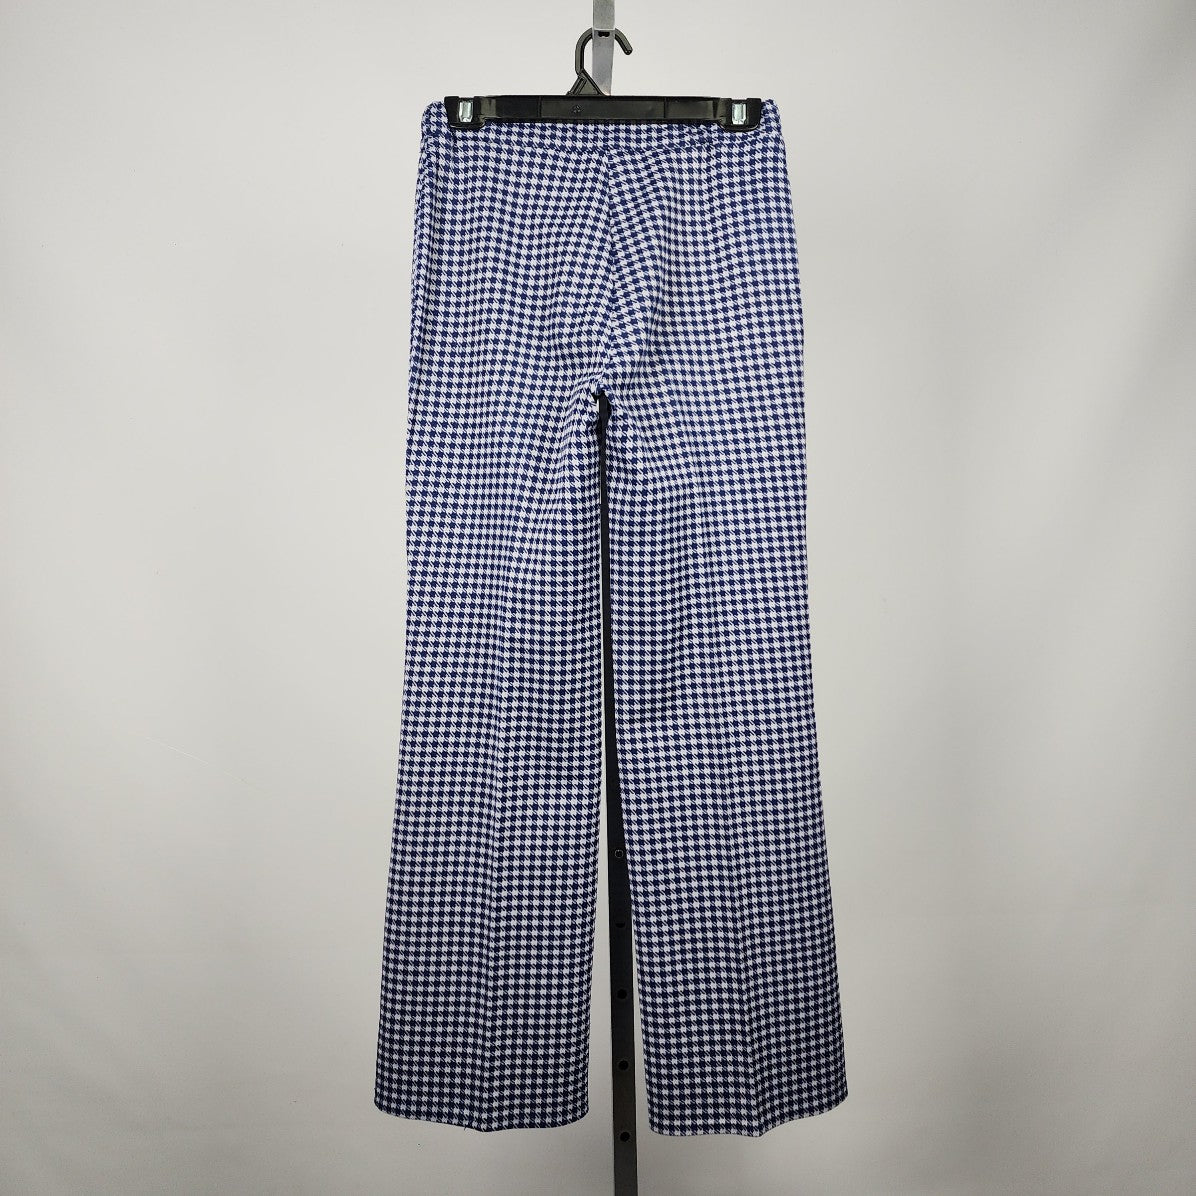 Vintage Navy Blue Plaid Check Bell Bottom Pants Size S/M